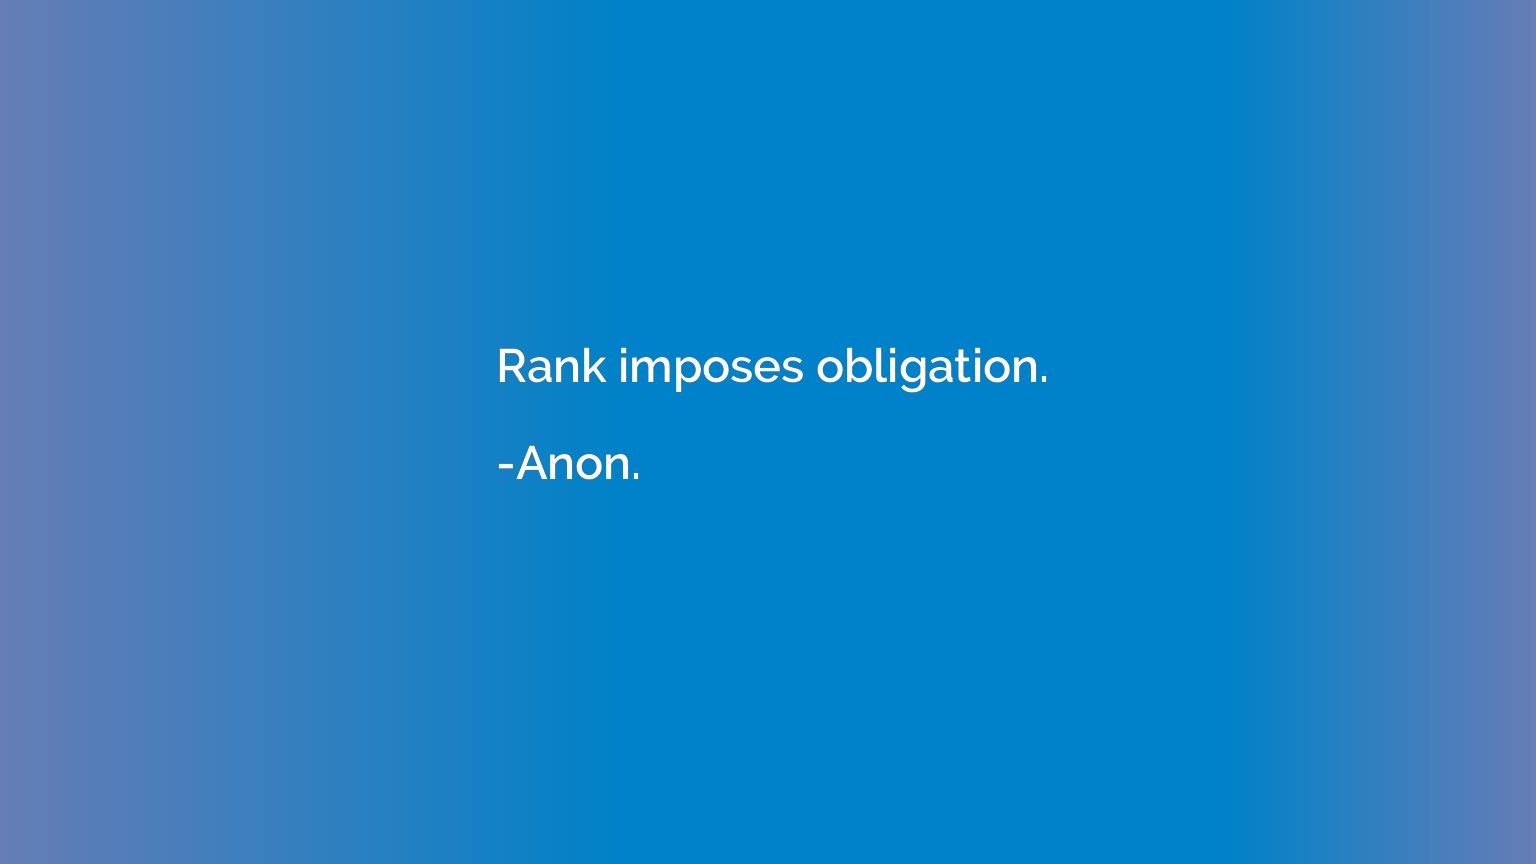 Rank imposes obligation.